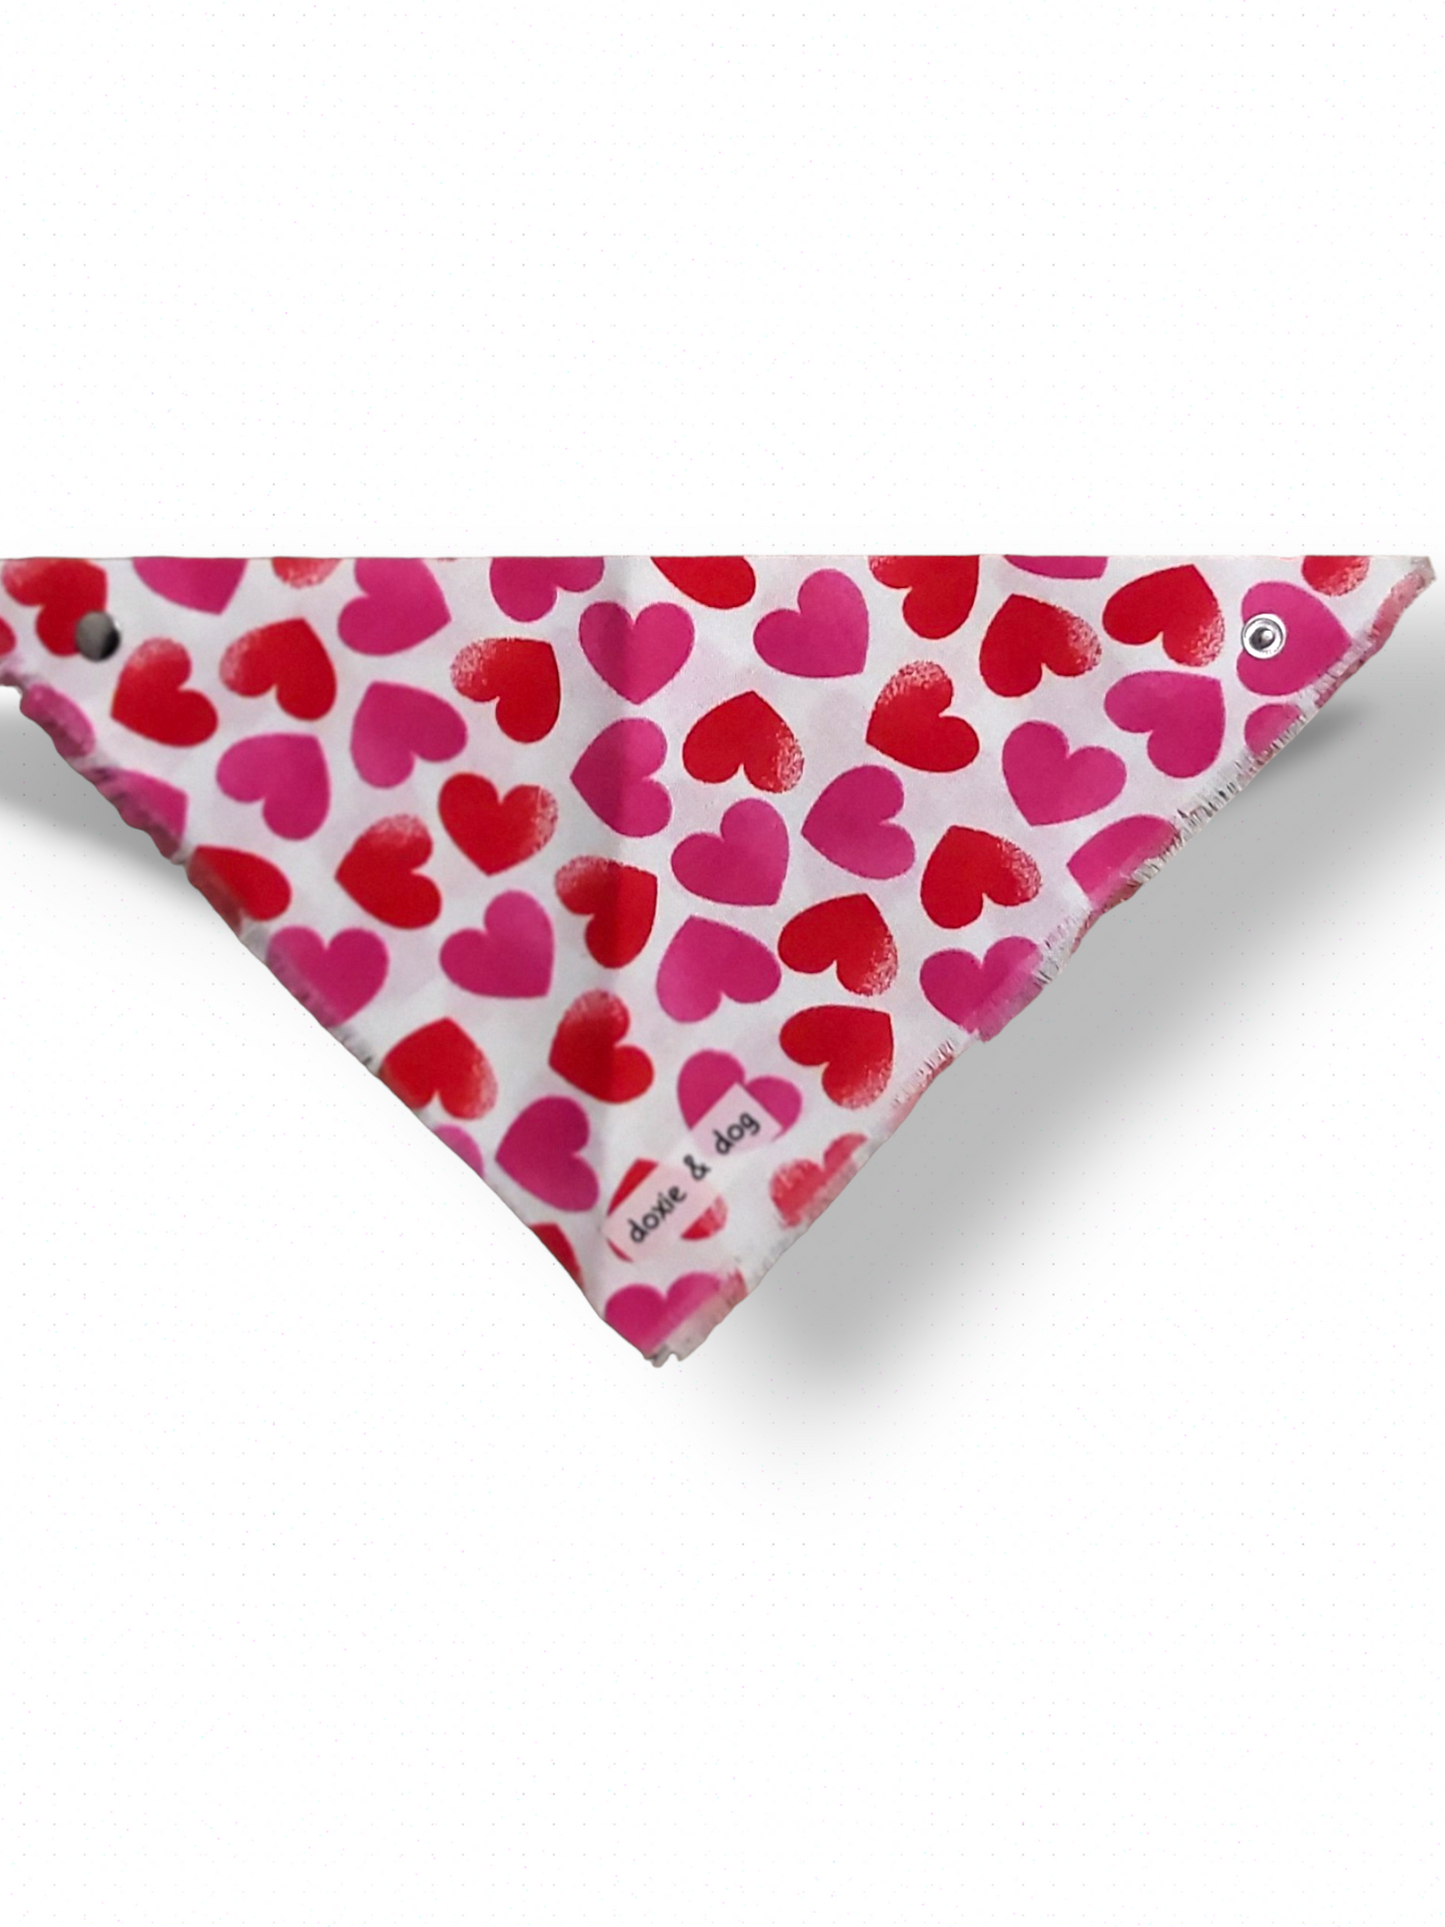 Valentine's Day Red and Pink Hearts Cotton Bandana